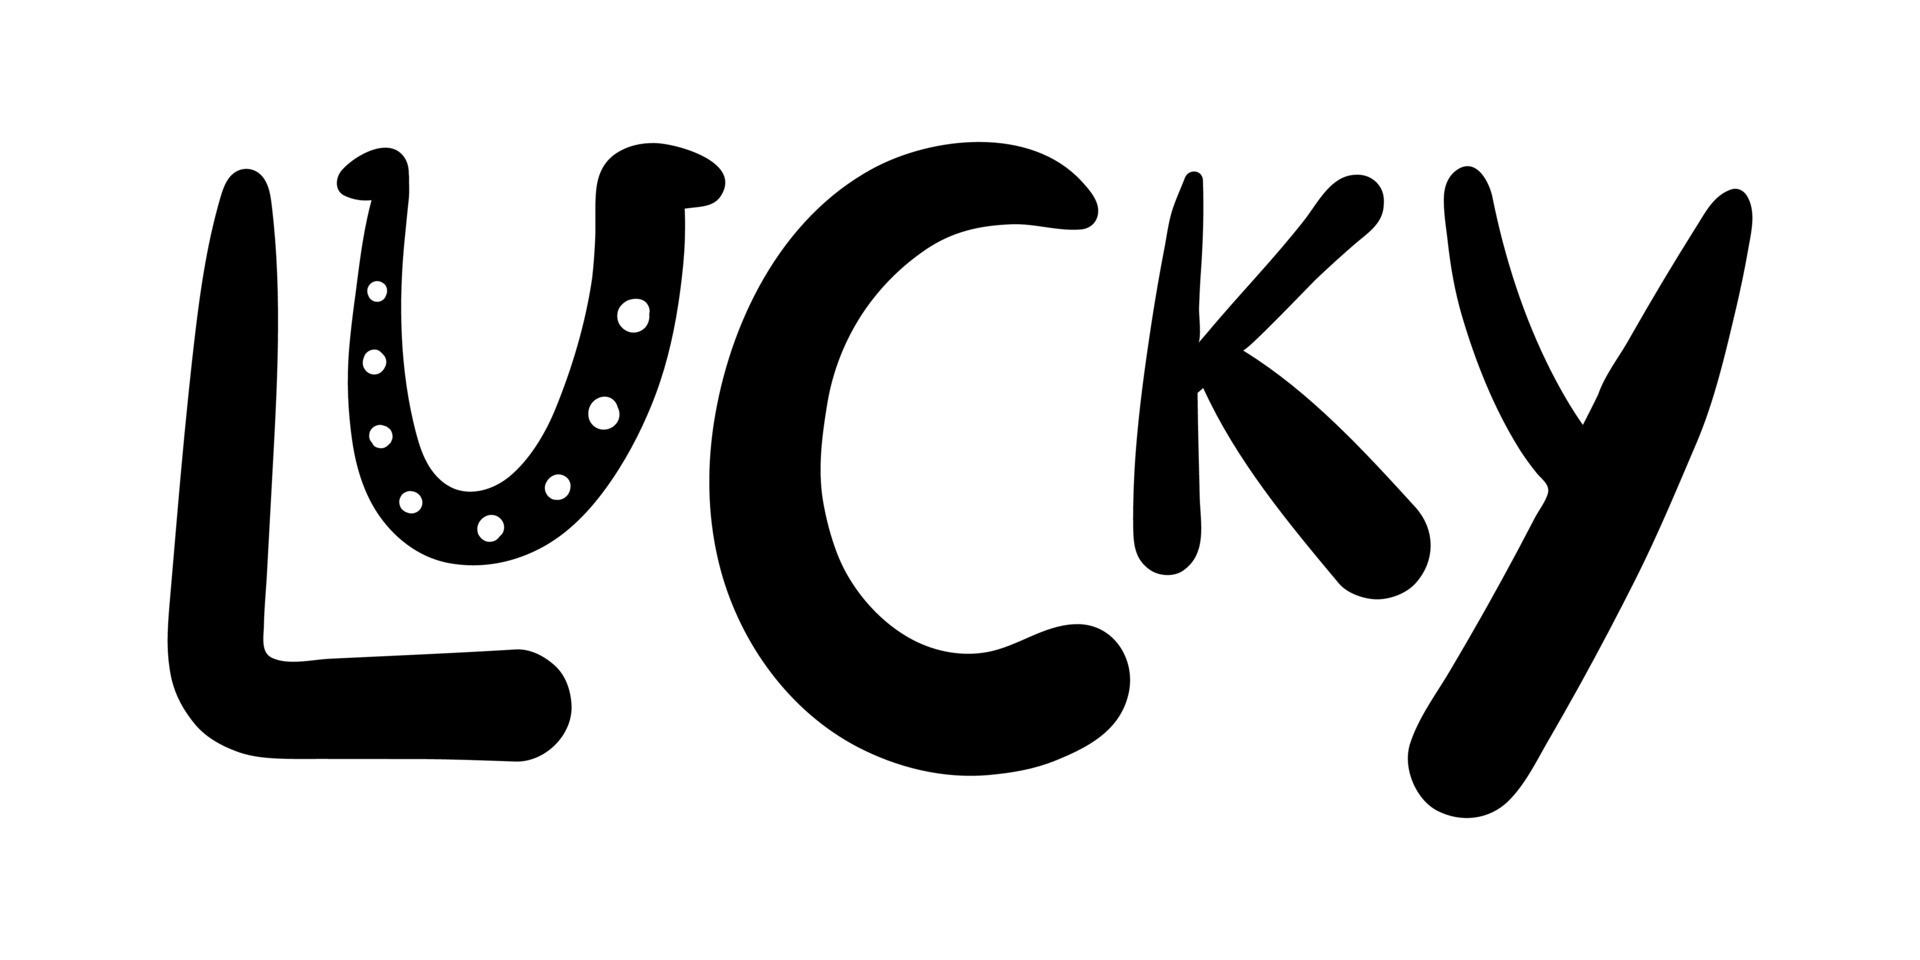 Lucky hand drawn lettering with horseshoe u vector illustration ...